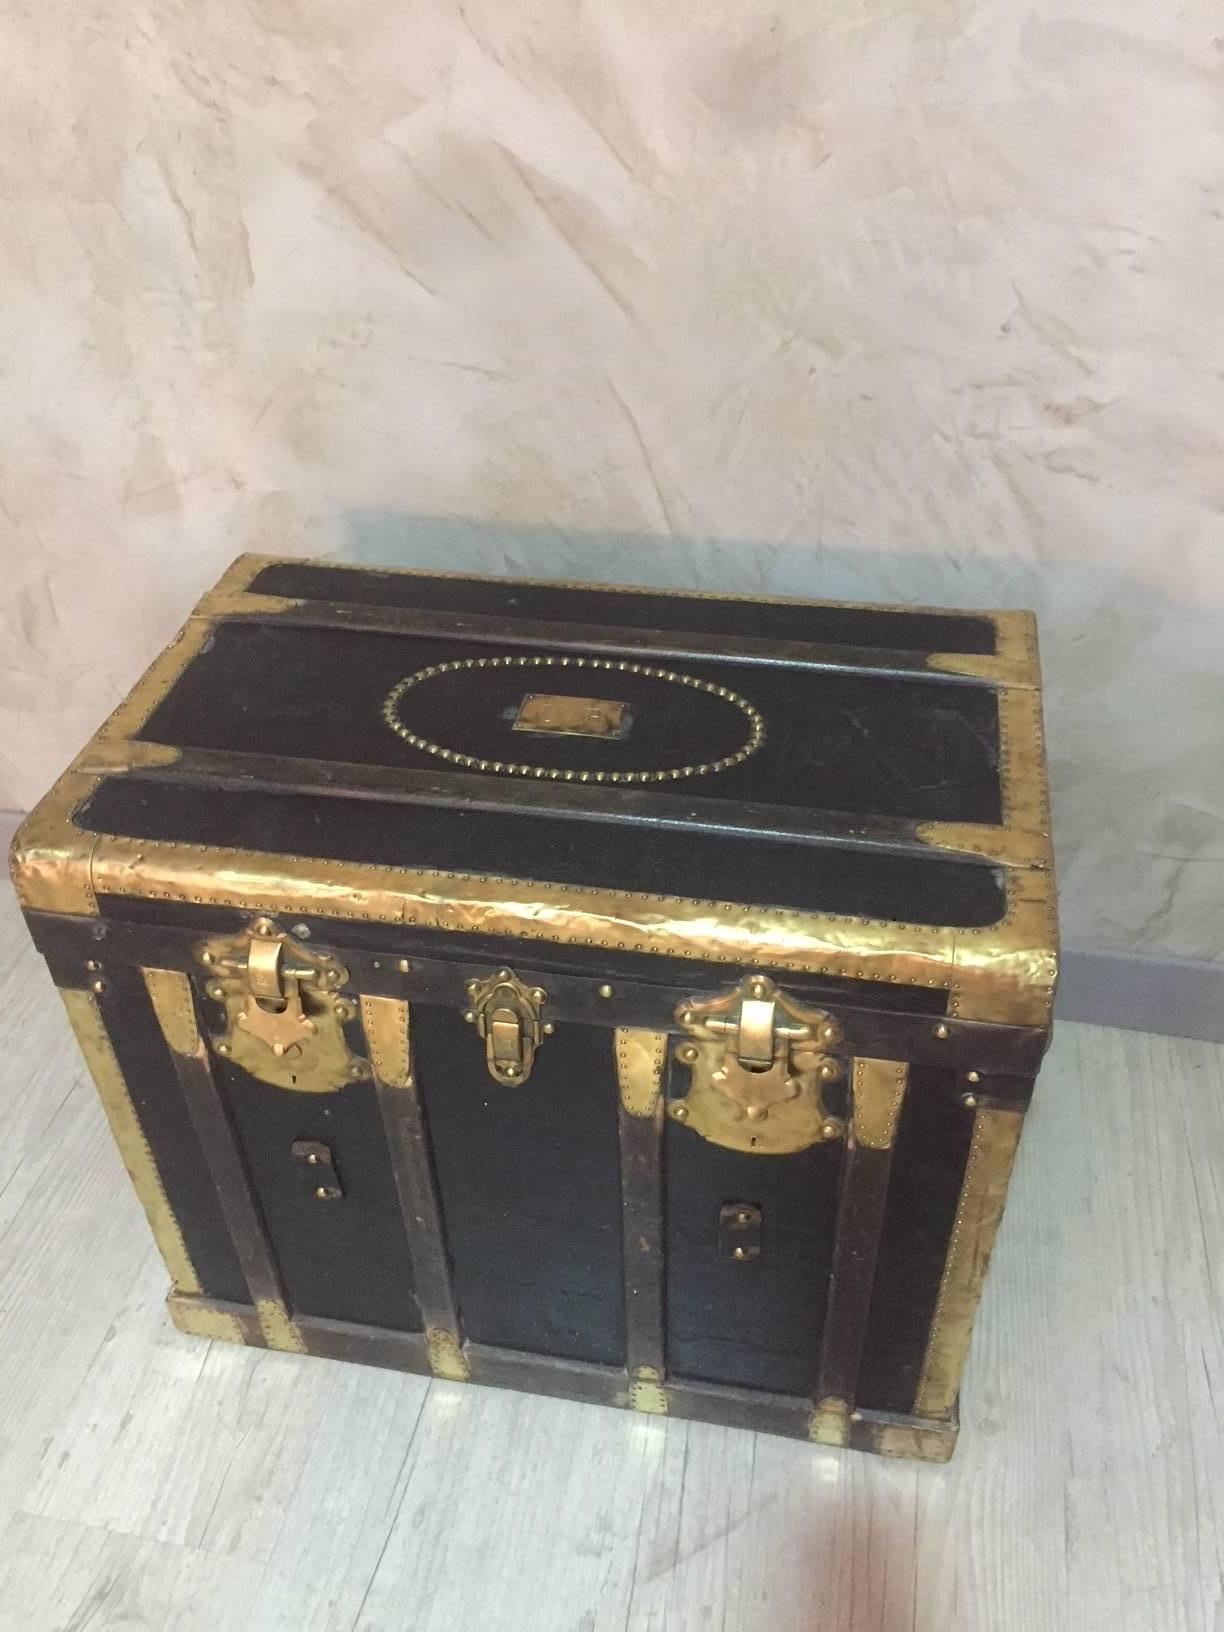 19th century wooden and gilded brass travel trunk. Coming from a French Manufacture (Lyon) as you can see on the brass plate. Leather handles.